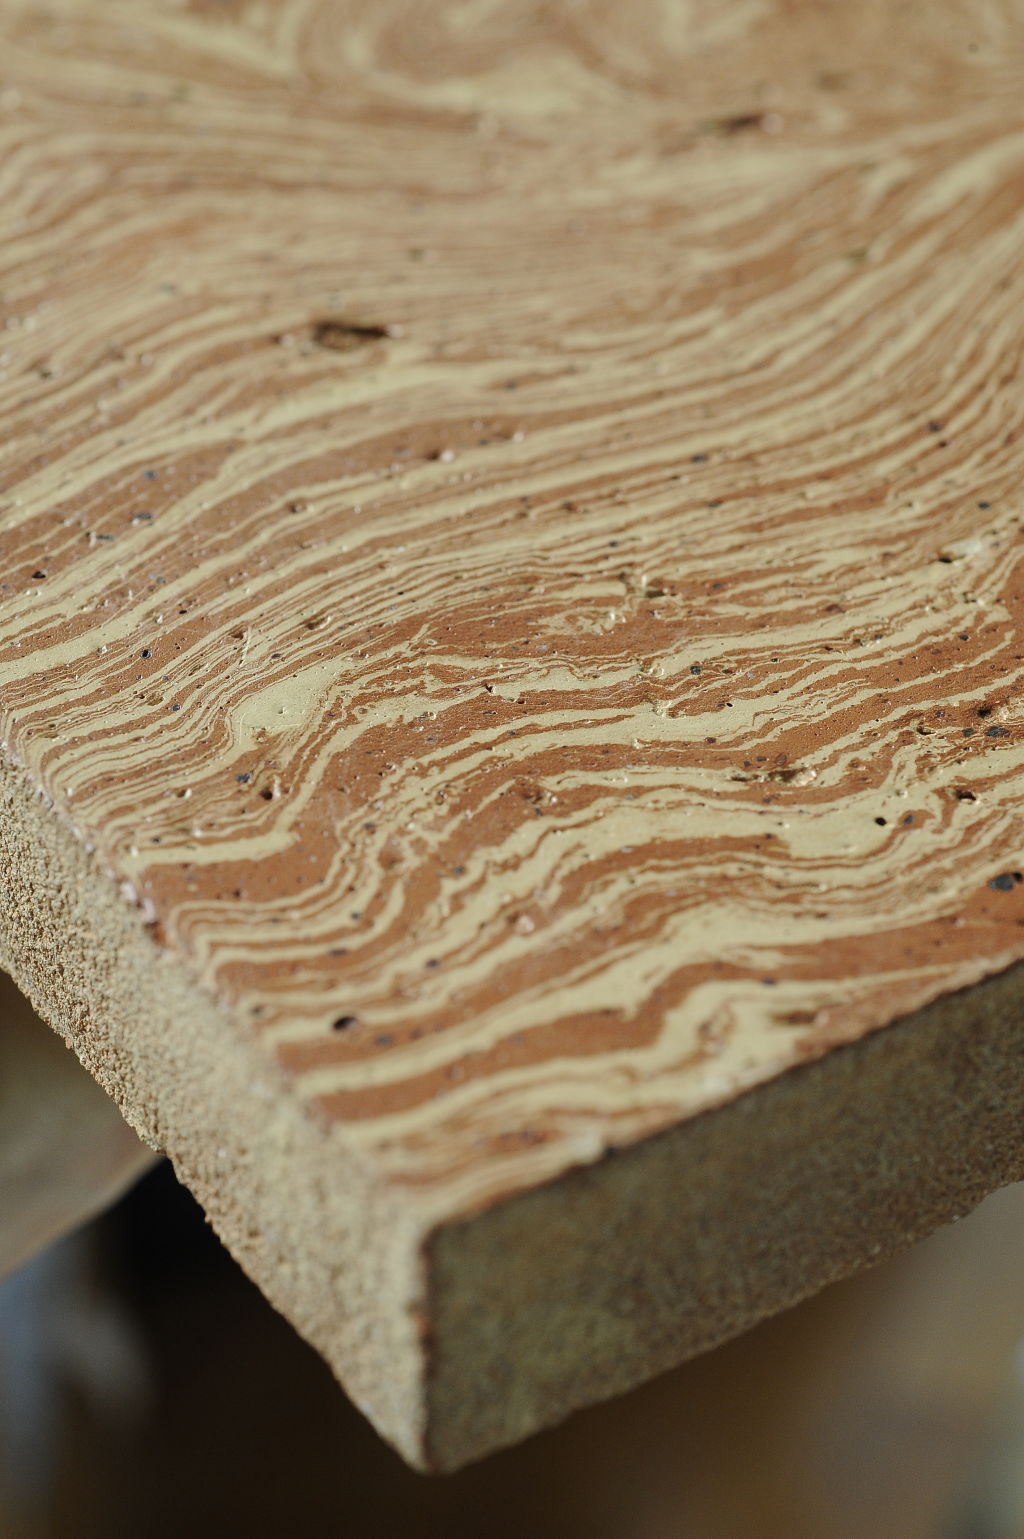 Materials will become overly earthy. Photo: Juliette Chrétien and Daniel Costa